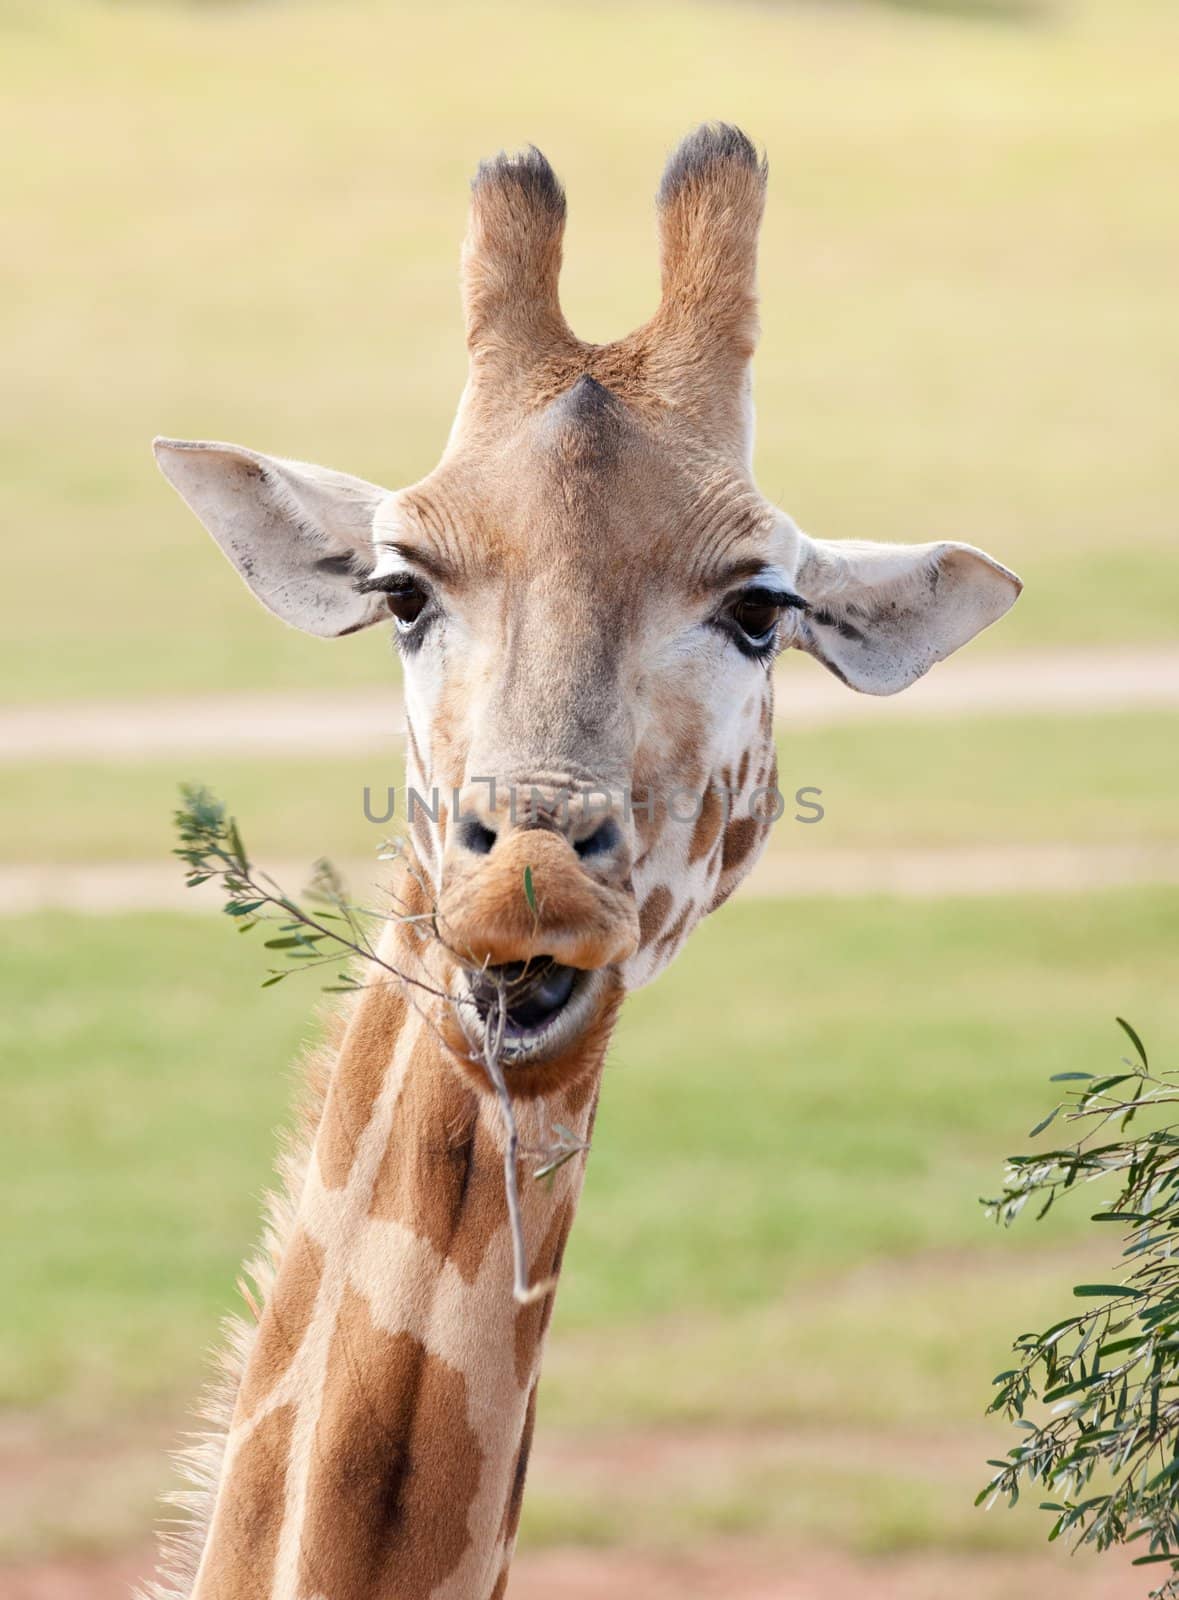 african giraffe up close by clearviewstock